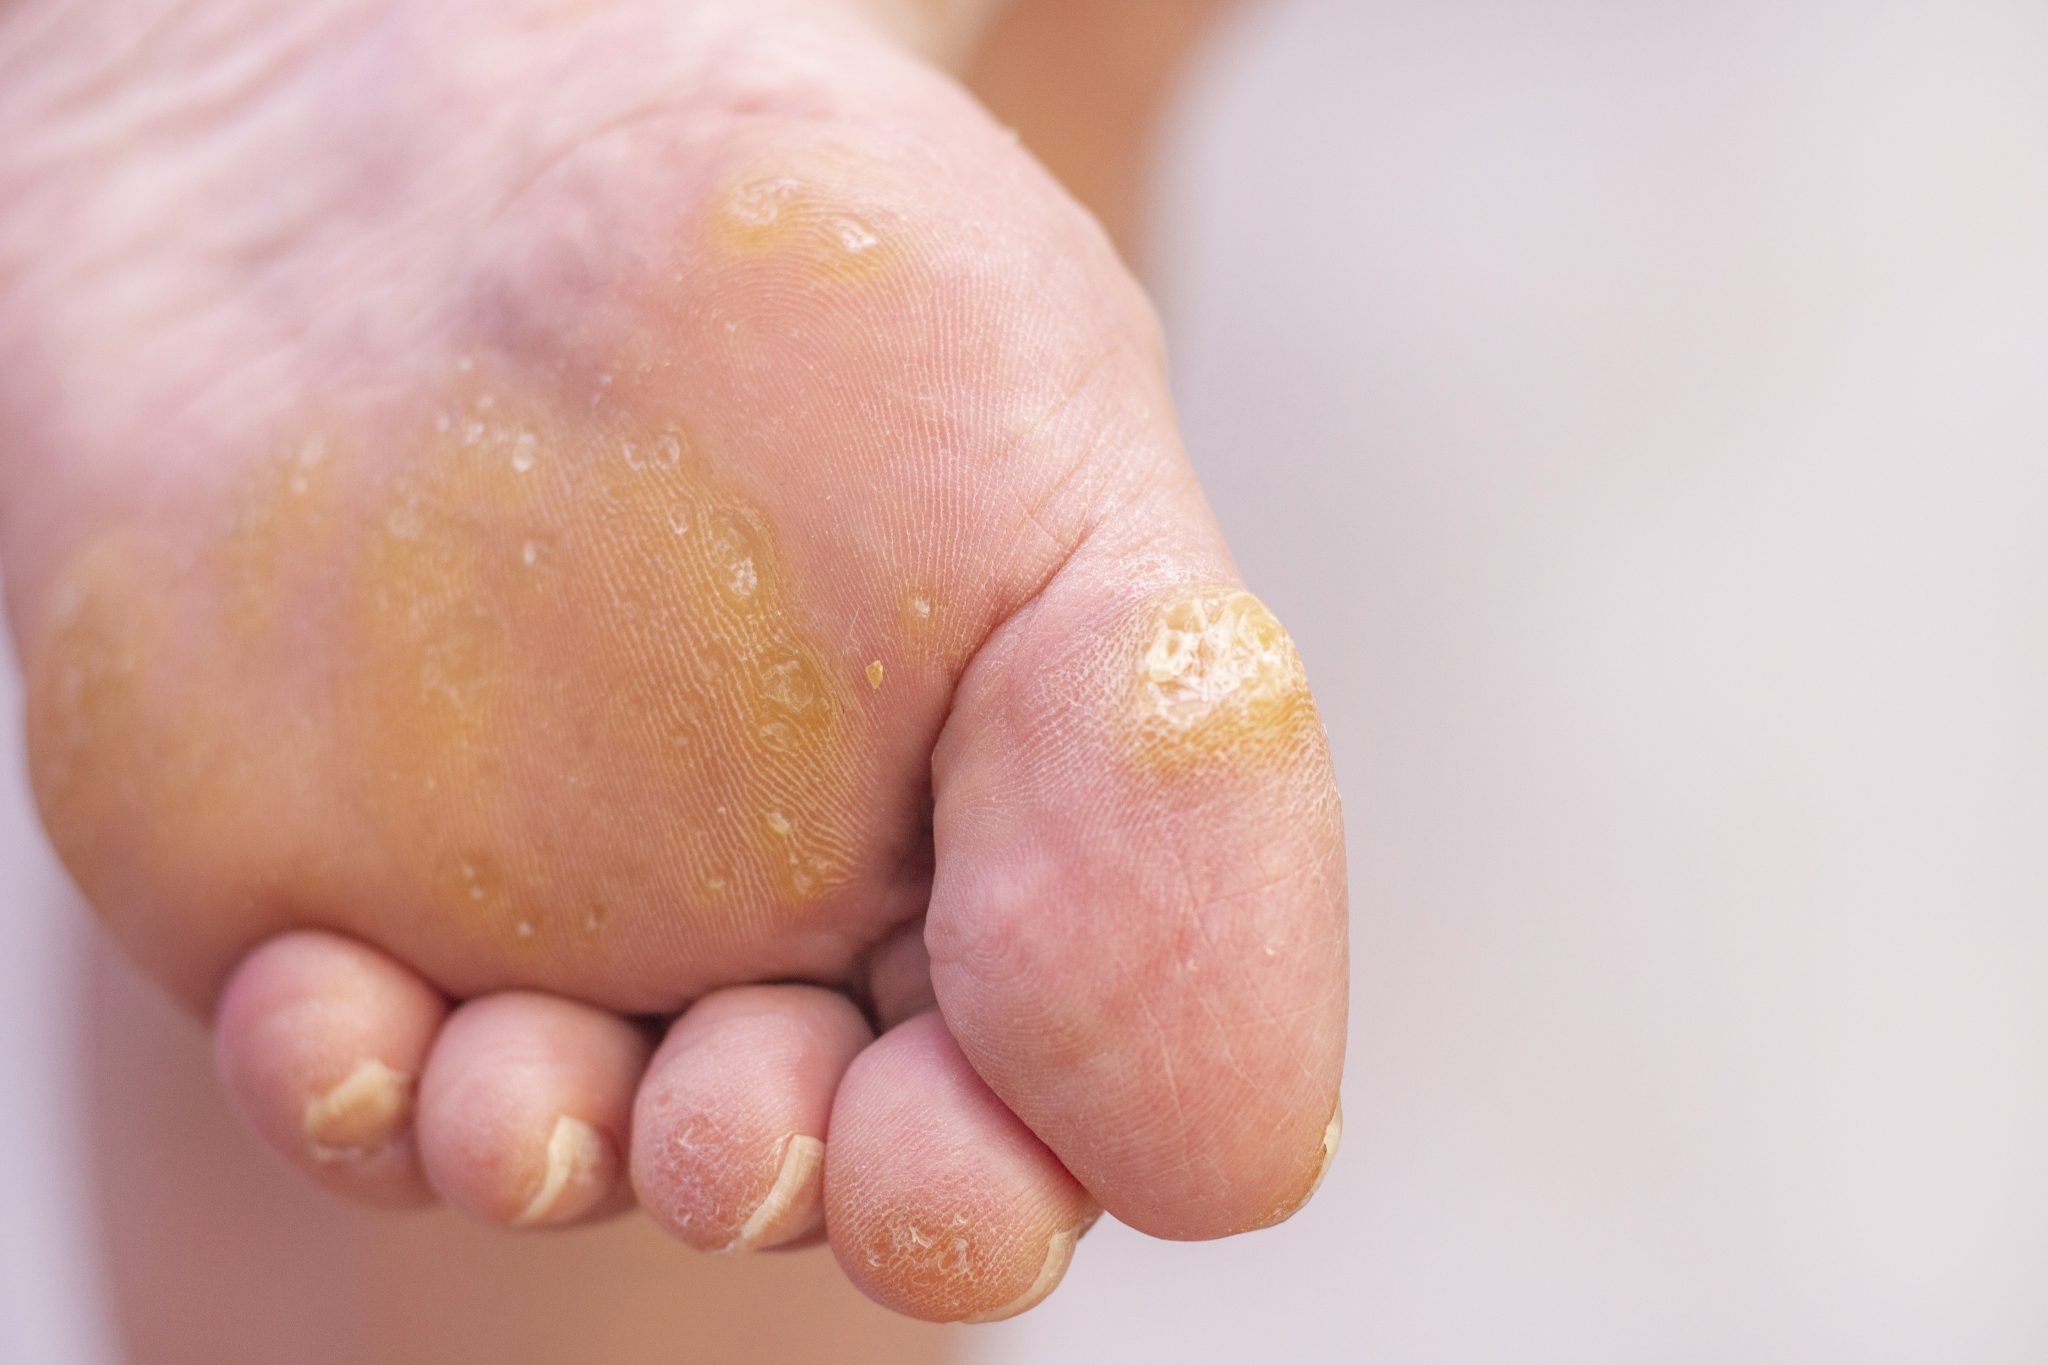 Calluses On Hands And Feet: Simple Home Remedies To Get Rid Of Ugly Corns